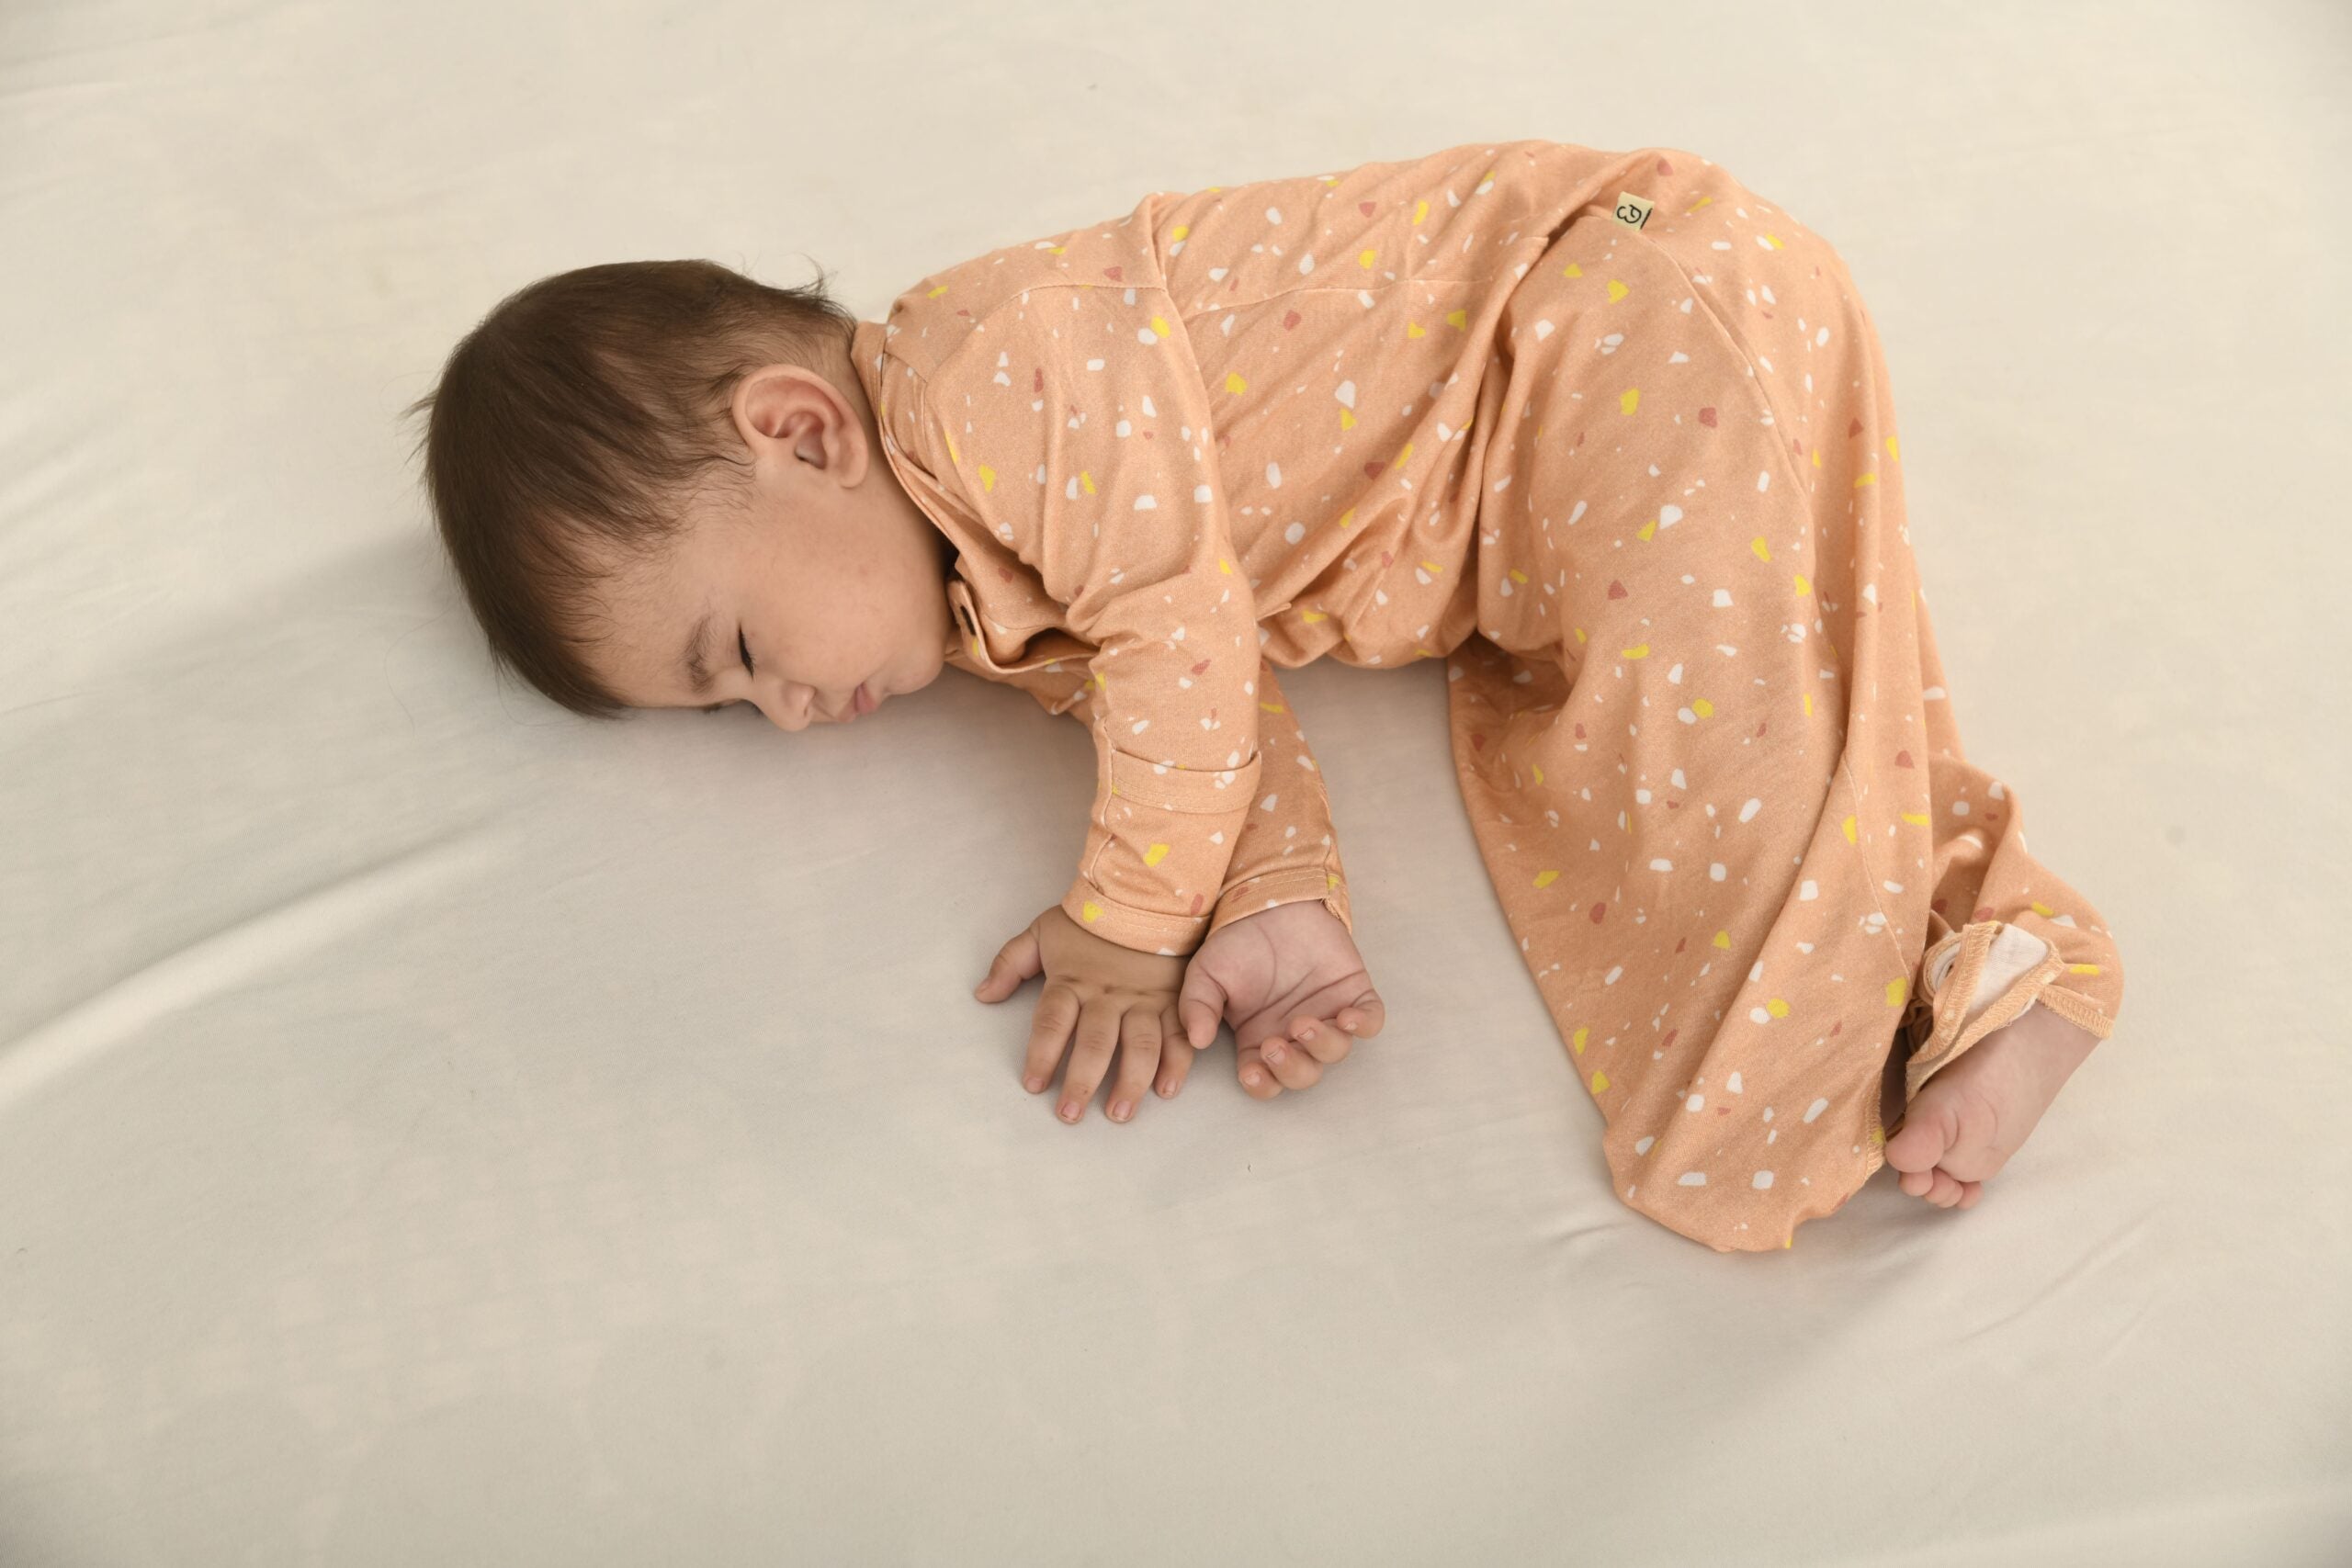 9 Tips That Can Help Your Baby Sleep Better at Night